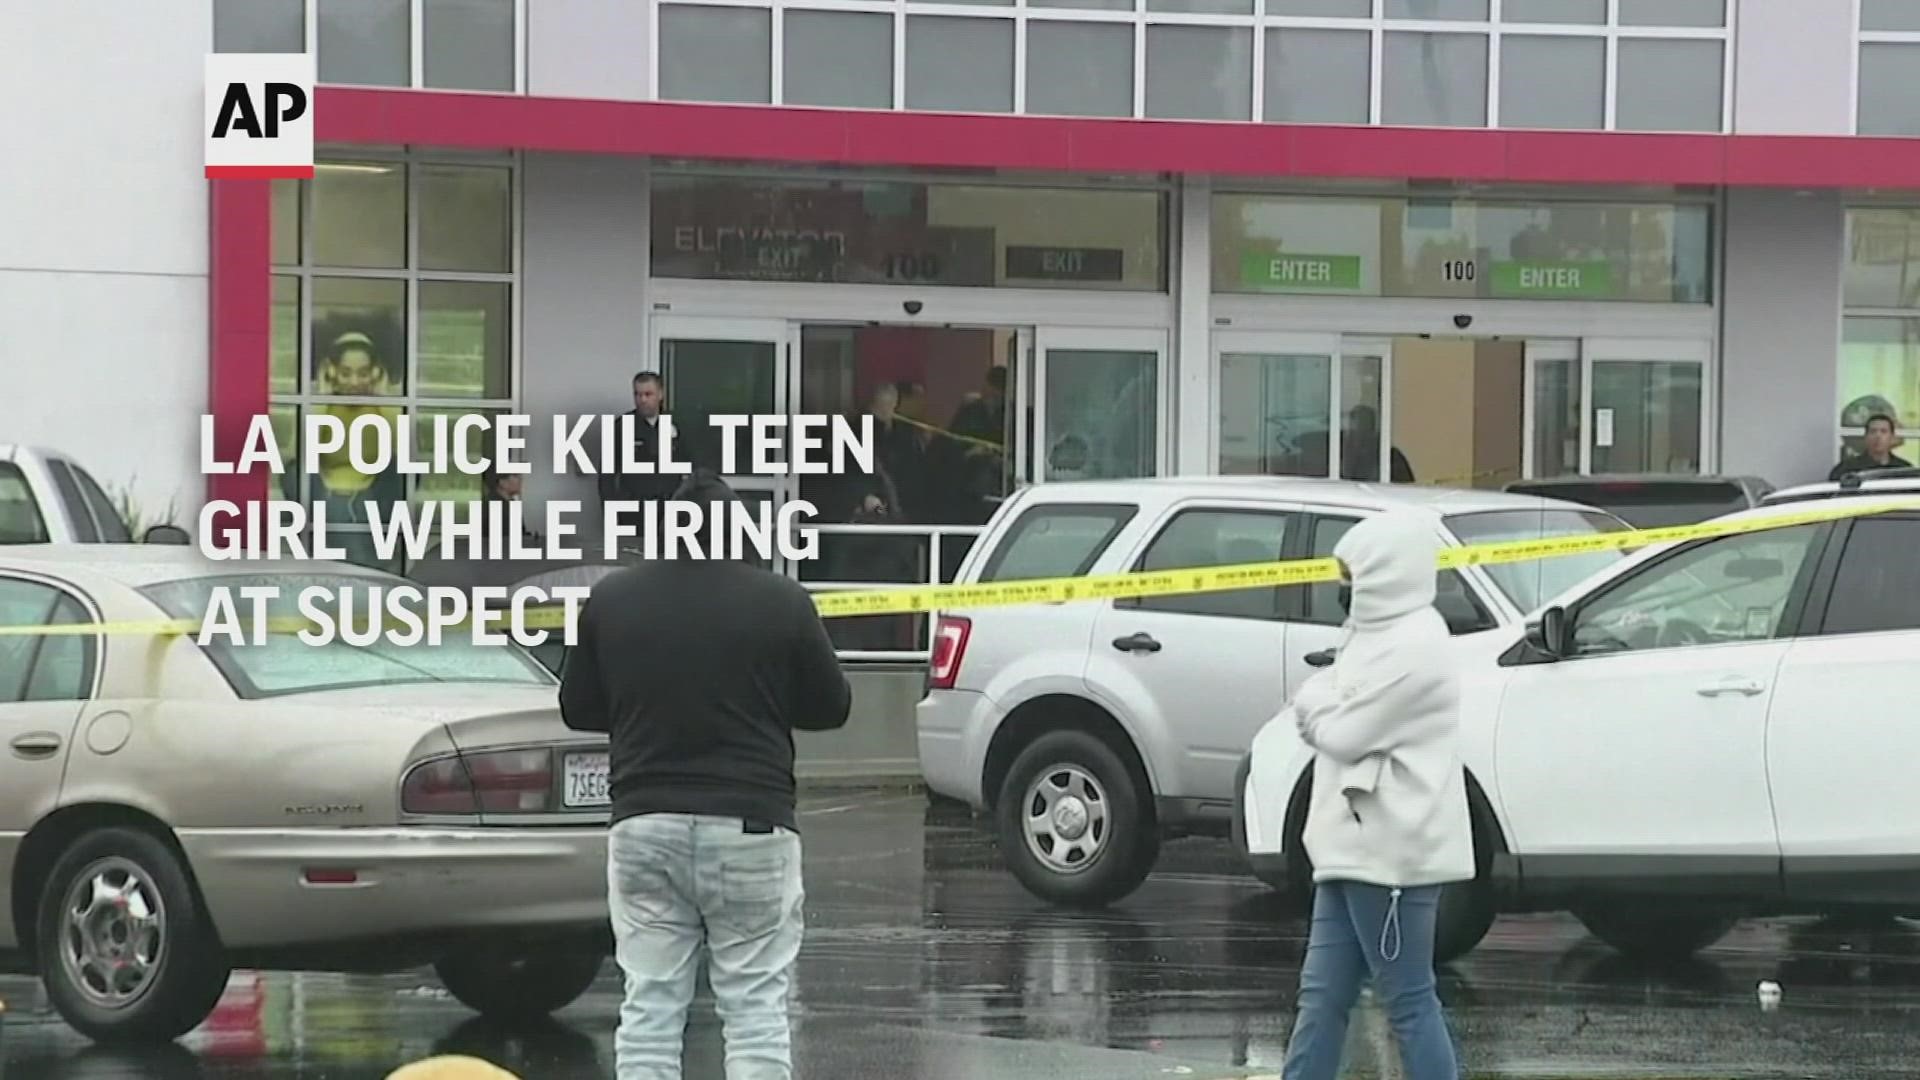 Los Angeles police fatally shot a 14-year-old girl who was inside a clothing store dressing room Thursday as they fired at an assault suspect.